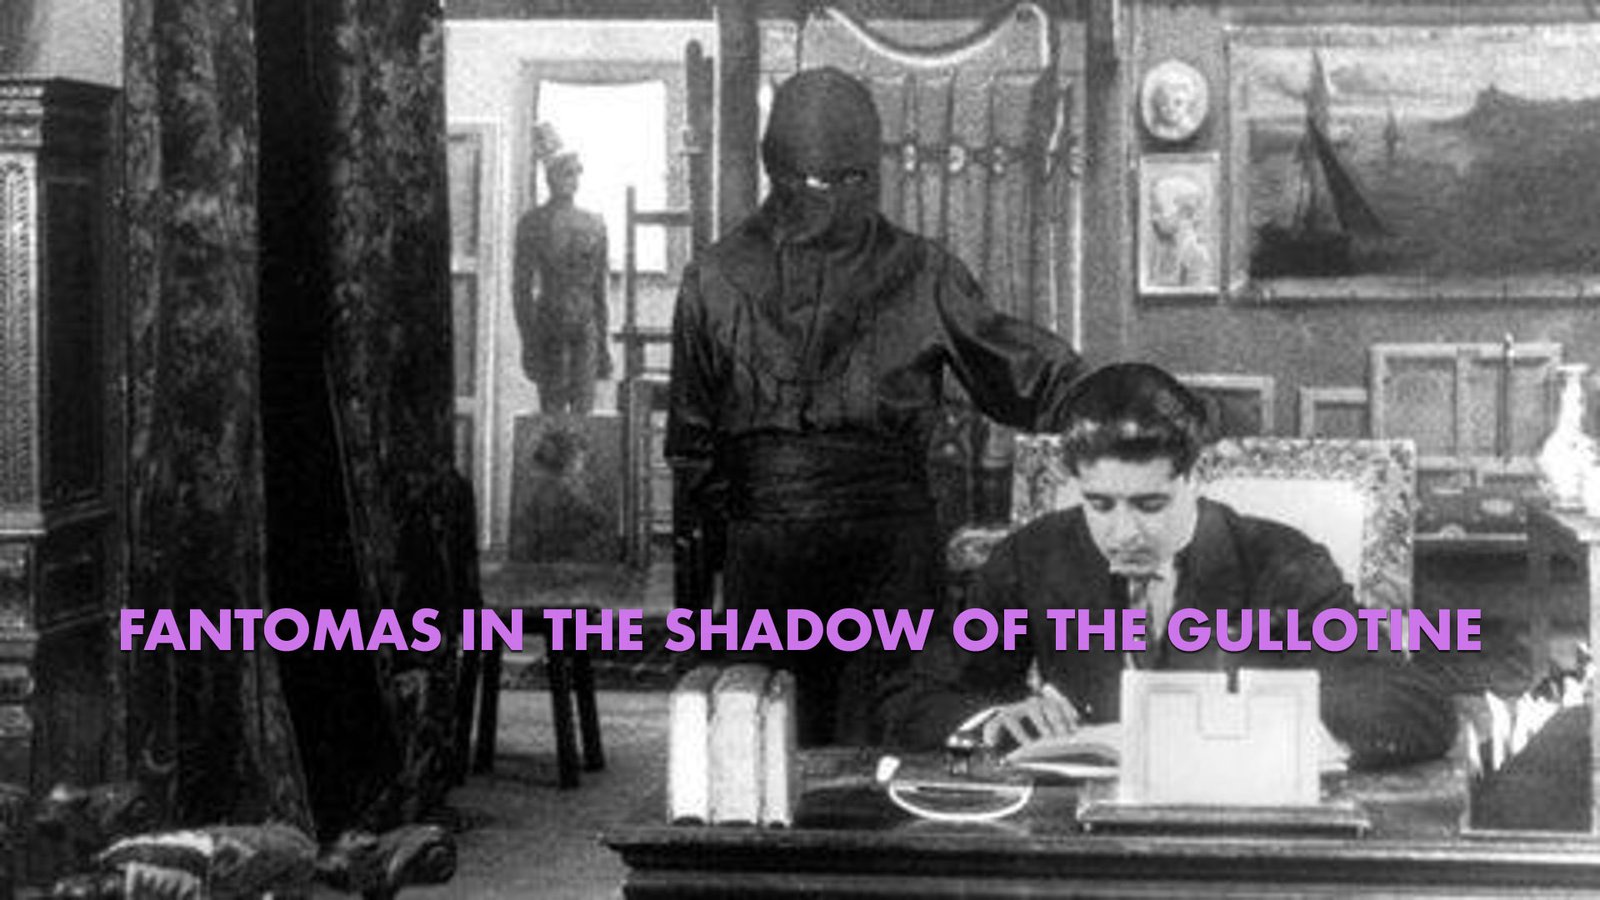 Fantomas in the Shadow of the Gullotine